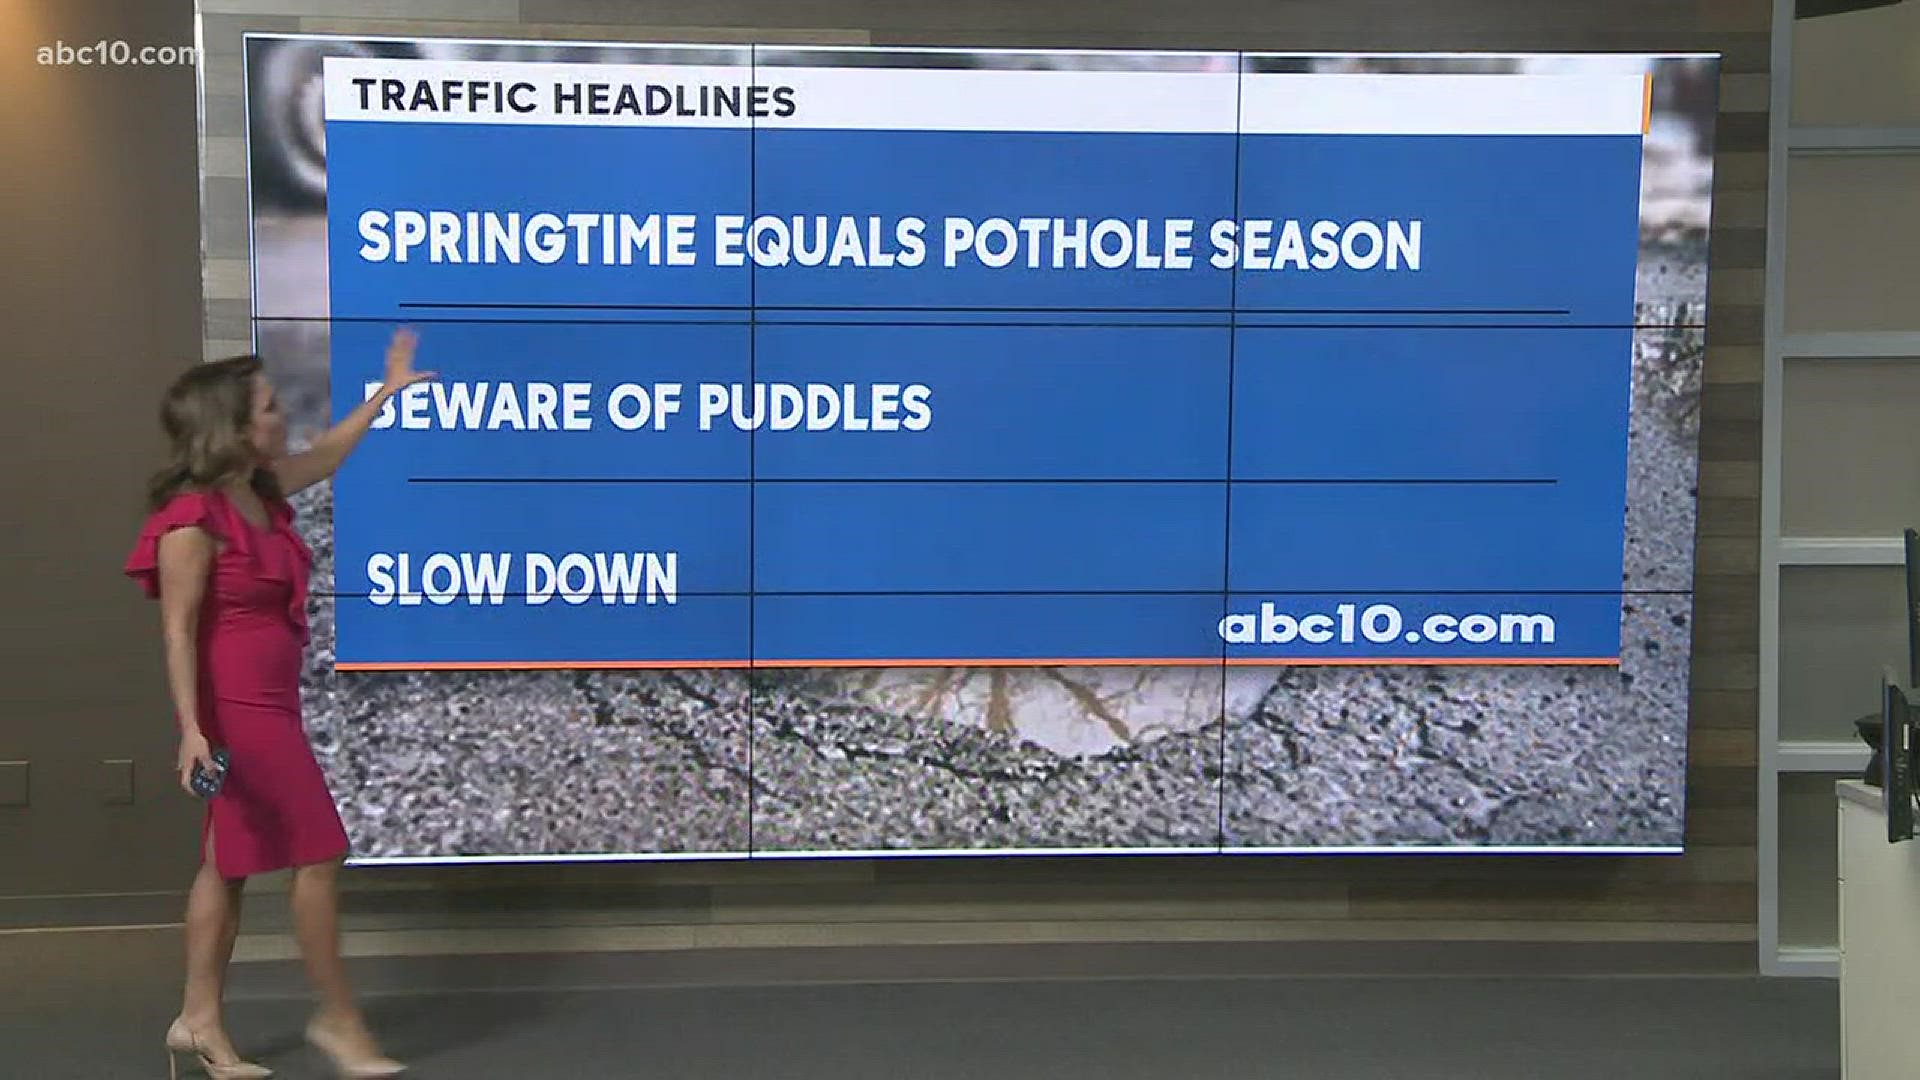 Spring is  the time when you'll see more potholes popping up. We've got a few tips on how to handle them.